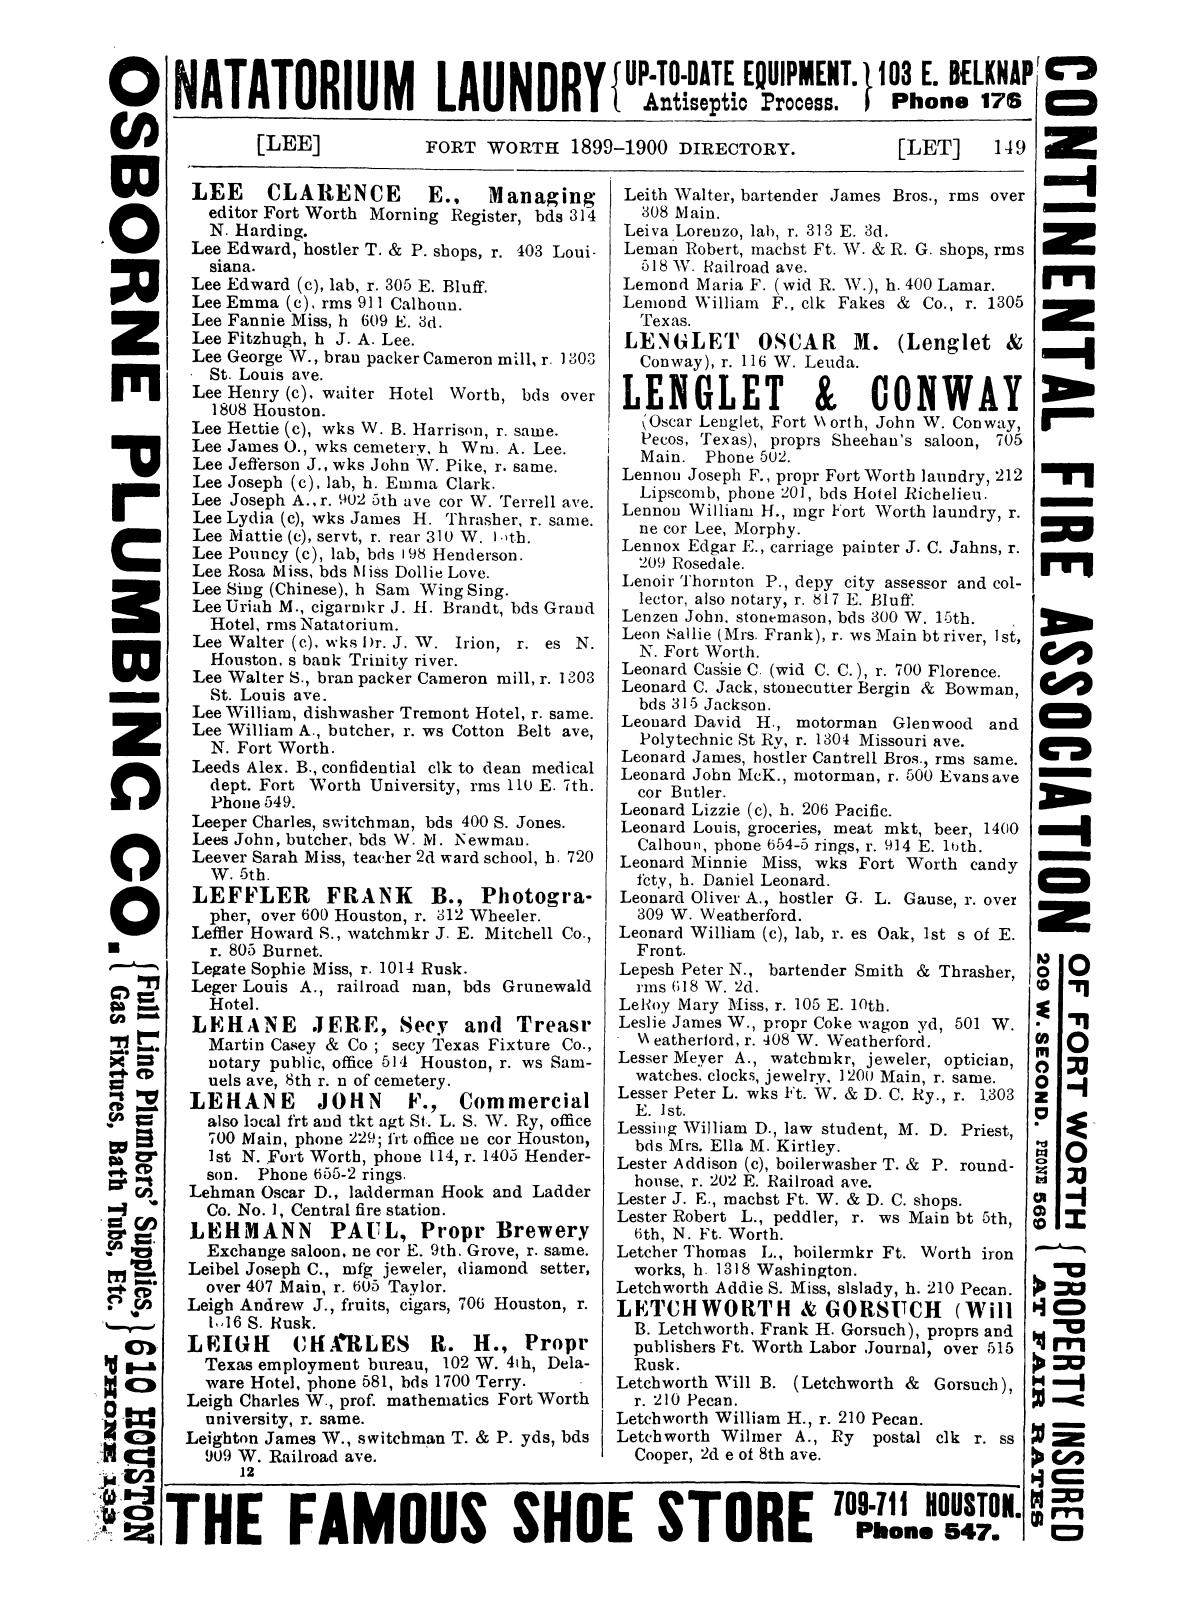 Morrison & Fourmy's General Directory of the City of Fort Worth 1899-1900.
                                                
                                                    149
                                                